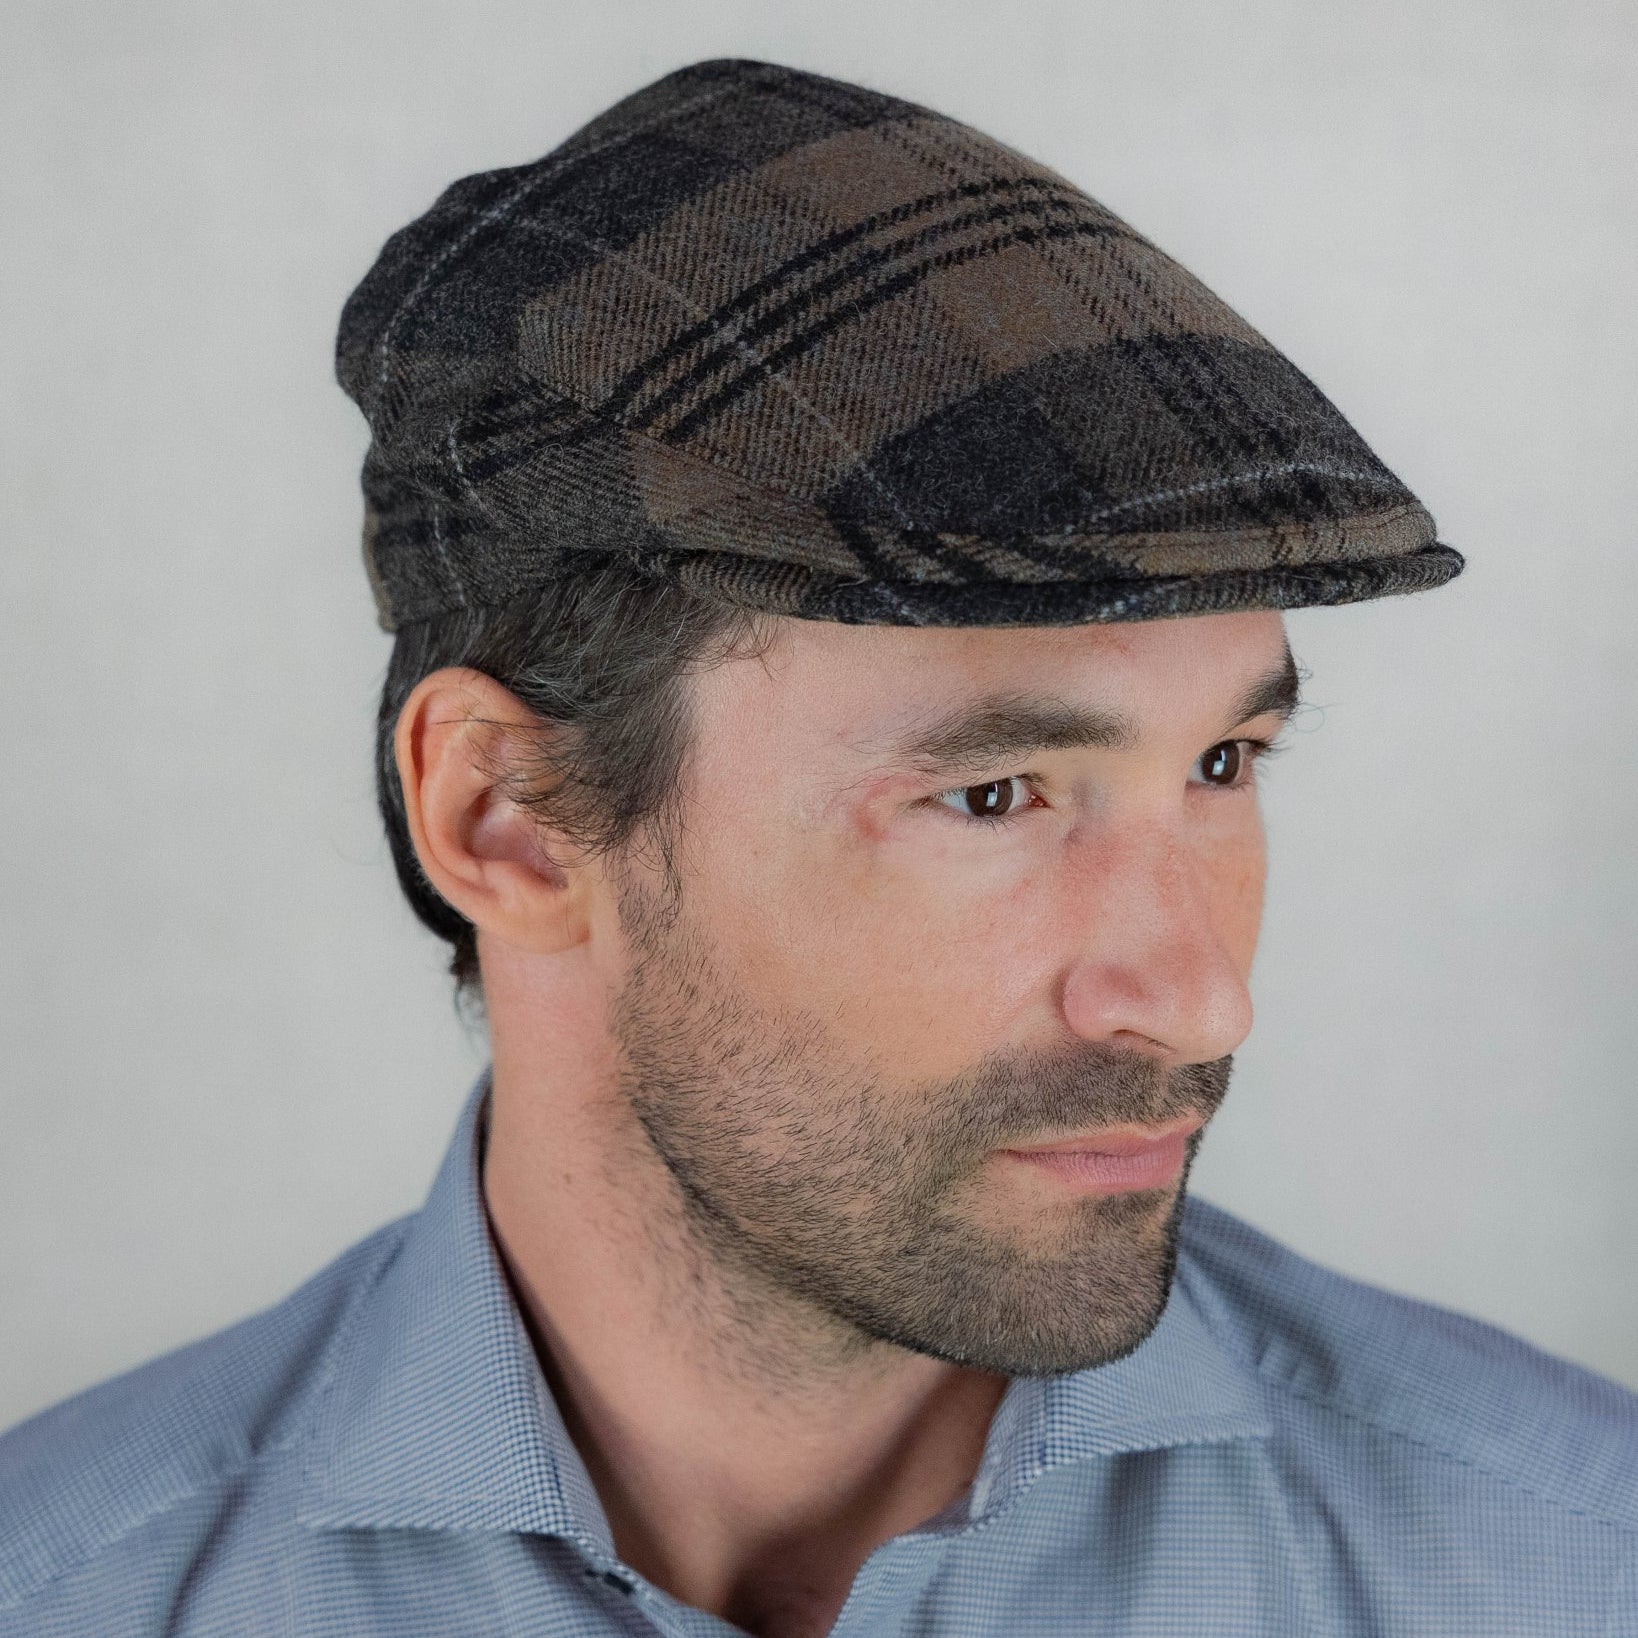 Black & Beige Check Wool Made In England Flat Cap